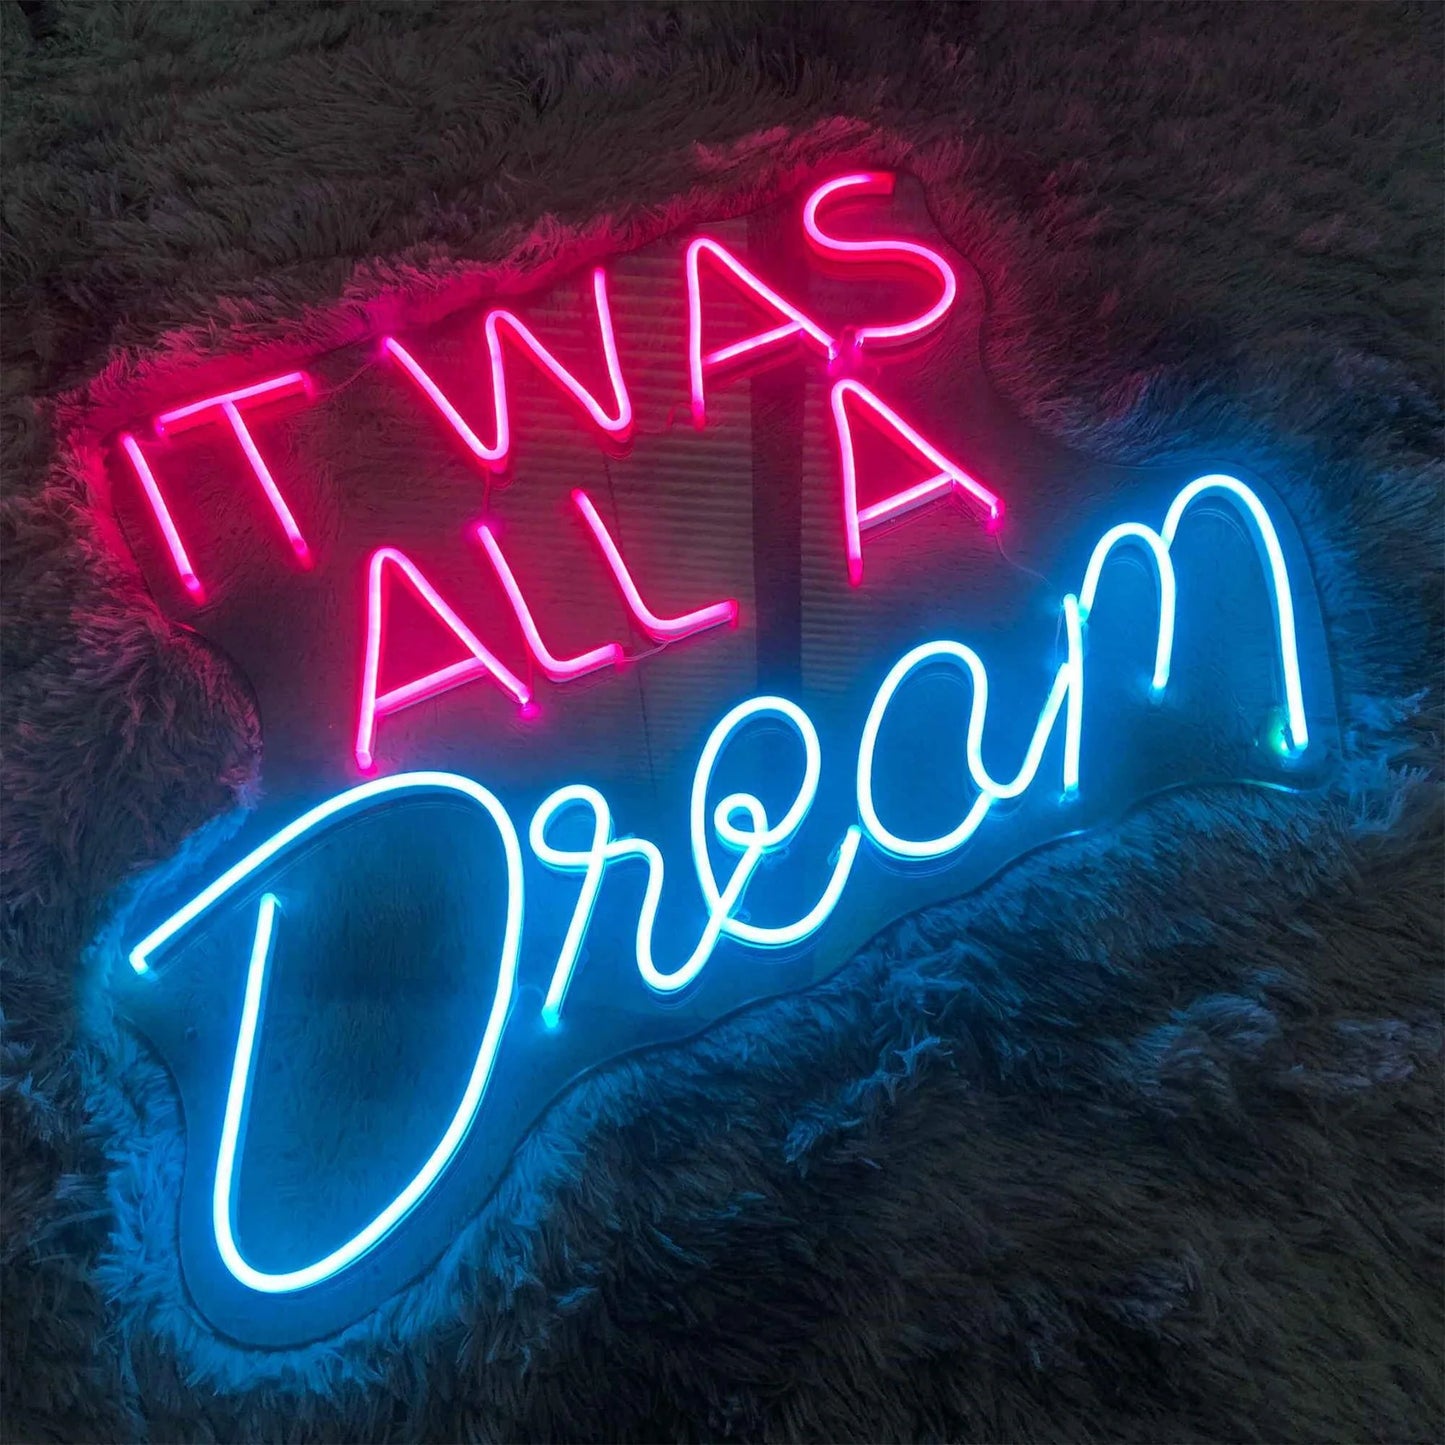 IT WAS ALL A DREAM NEON SIGNS ROOM